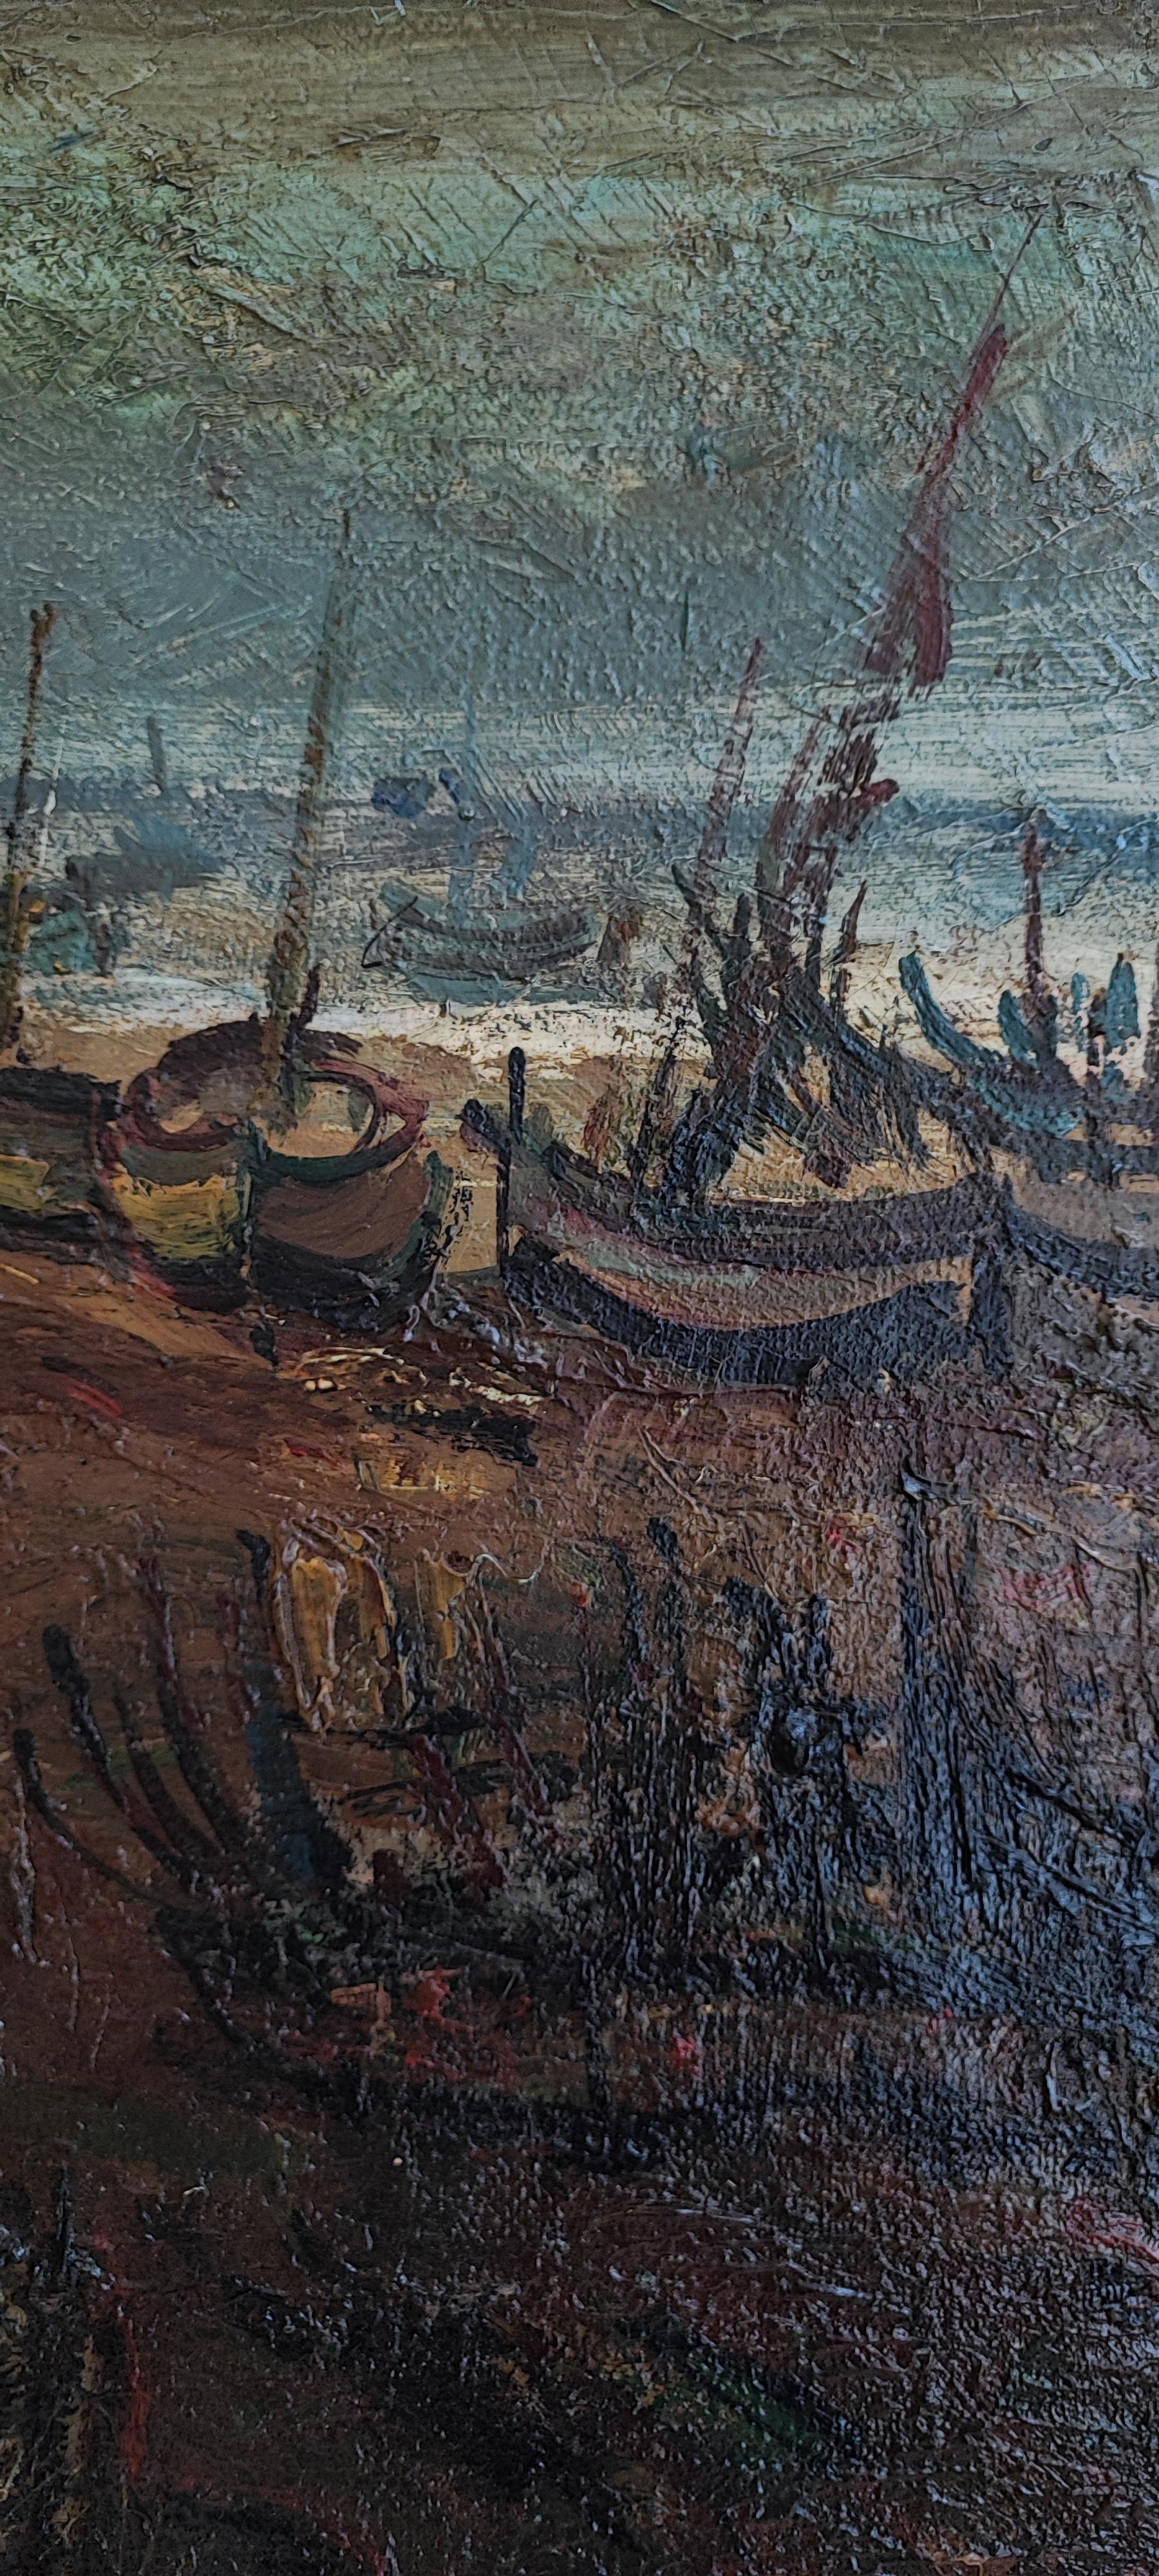 Boats and Fishermen - Black Landscape Painting by Sylvain Vigny